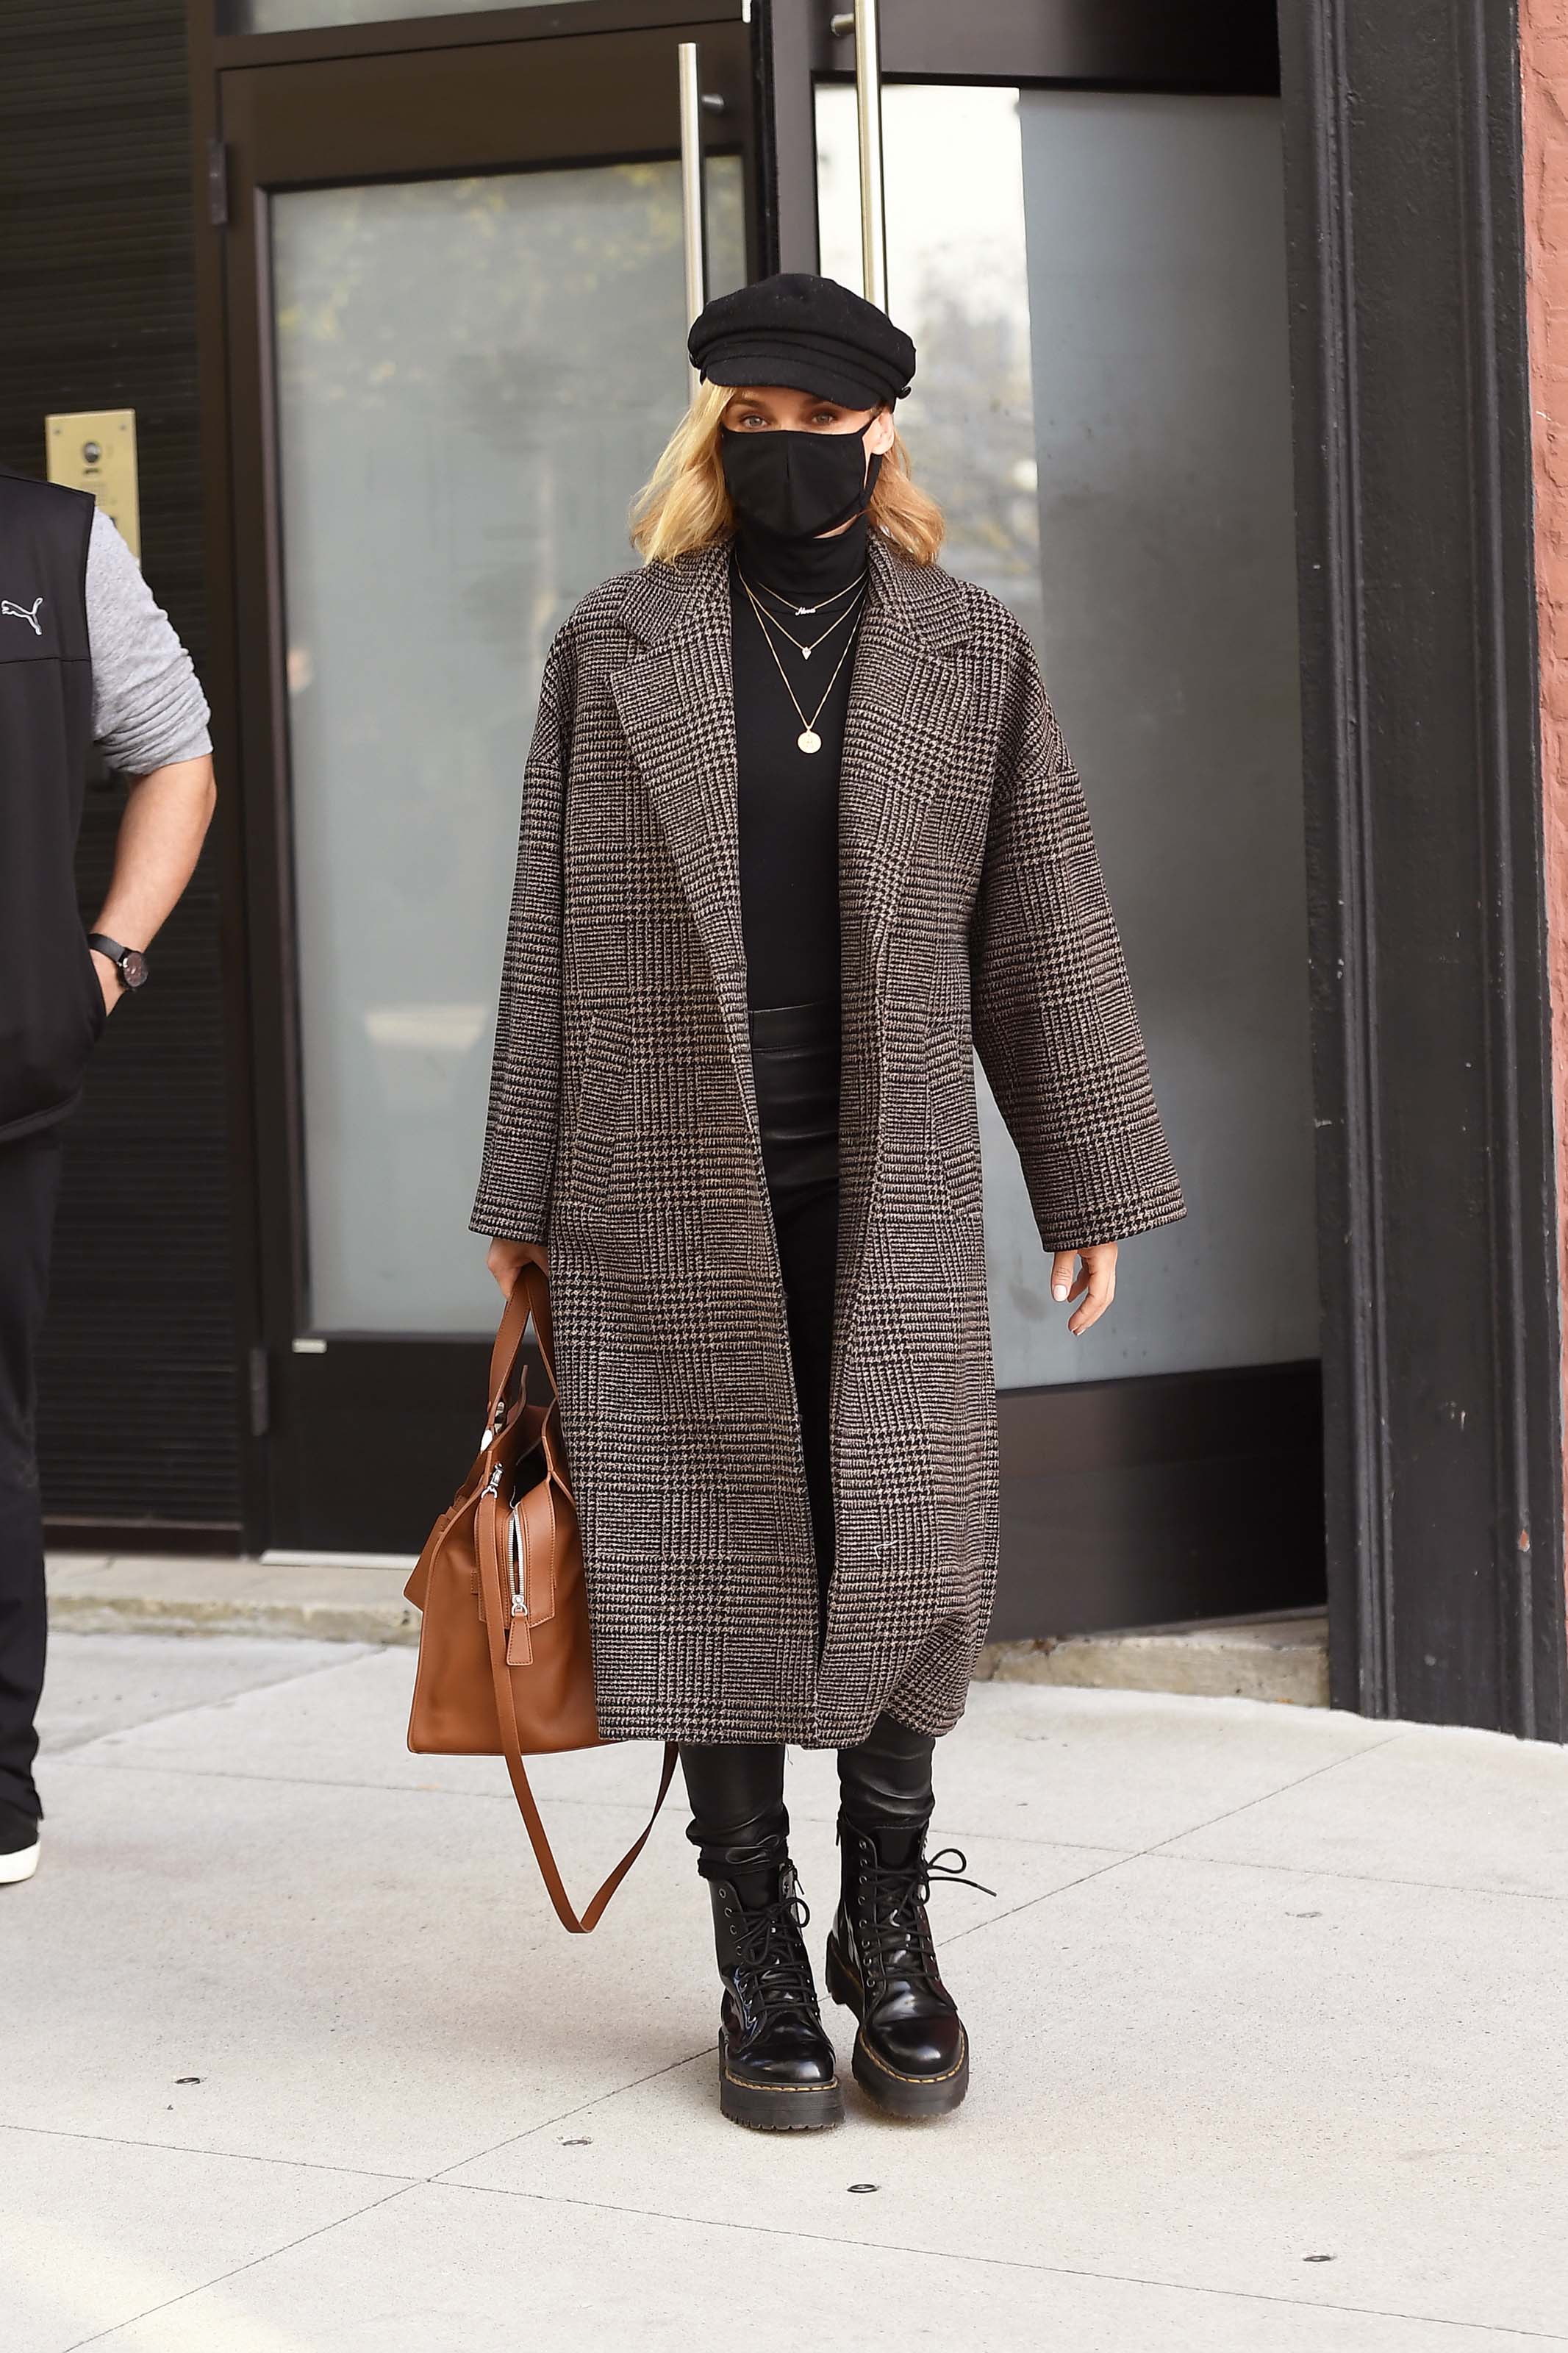 Diane Kruger leaving a photoshoot in New York City